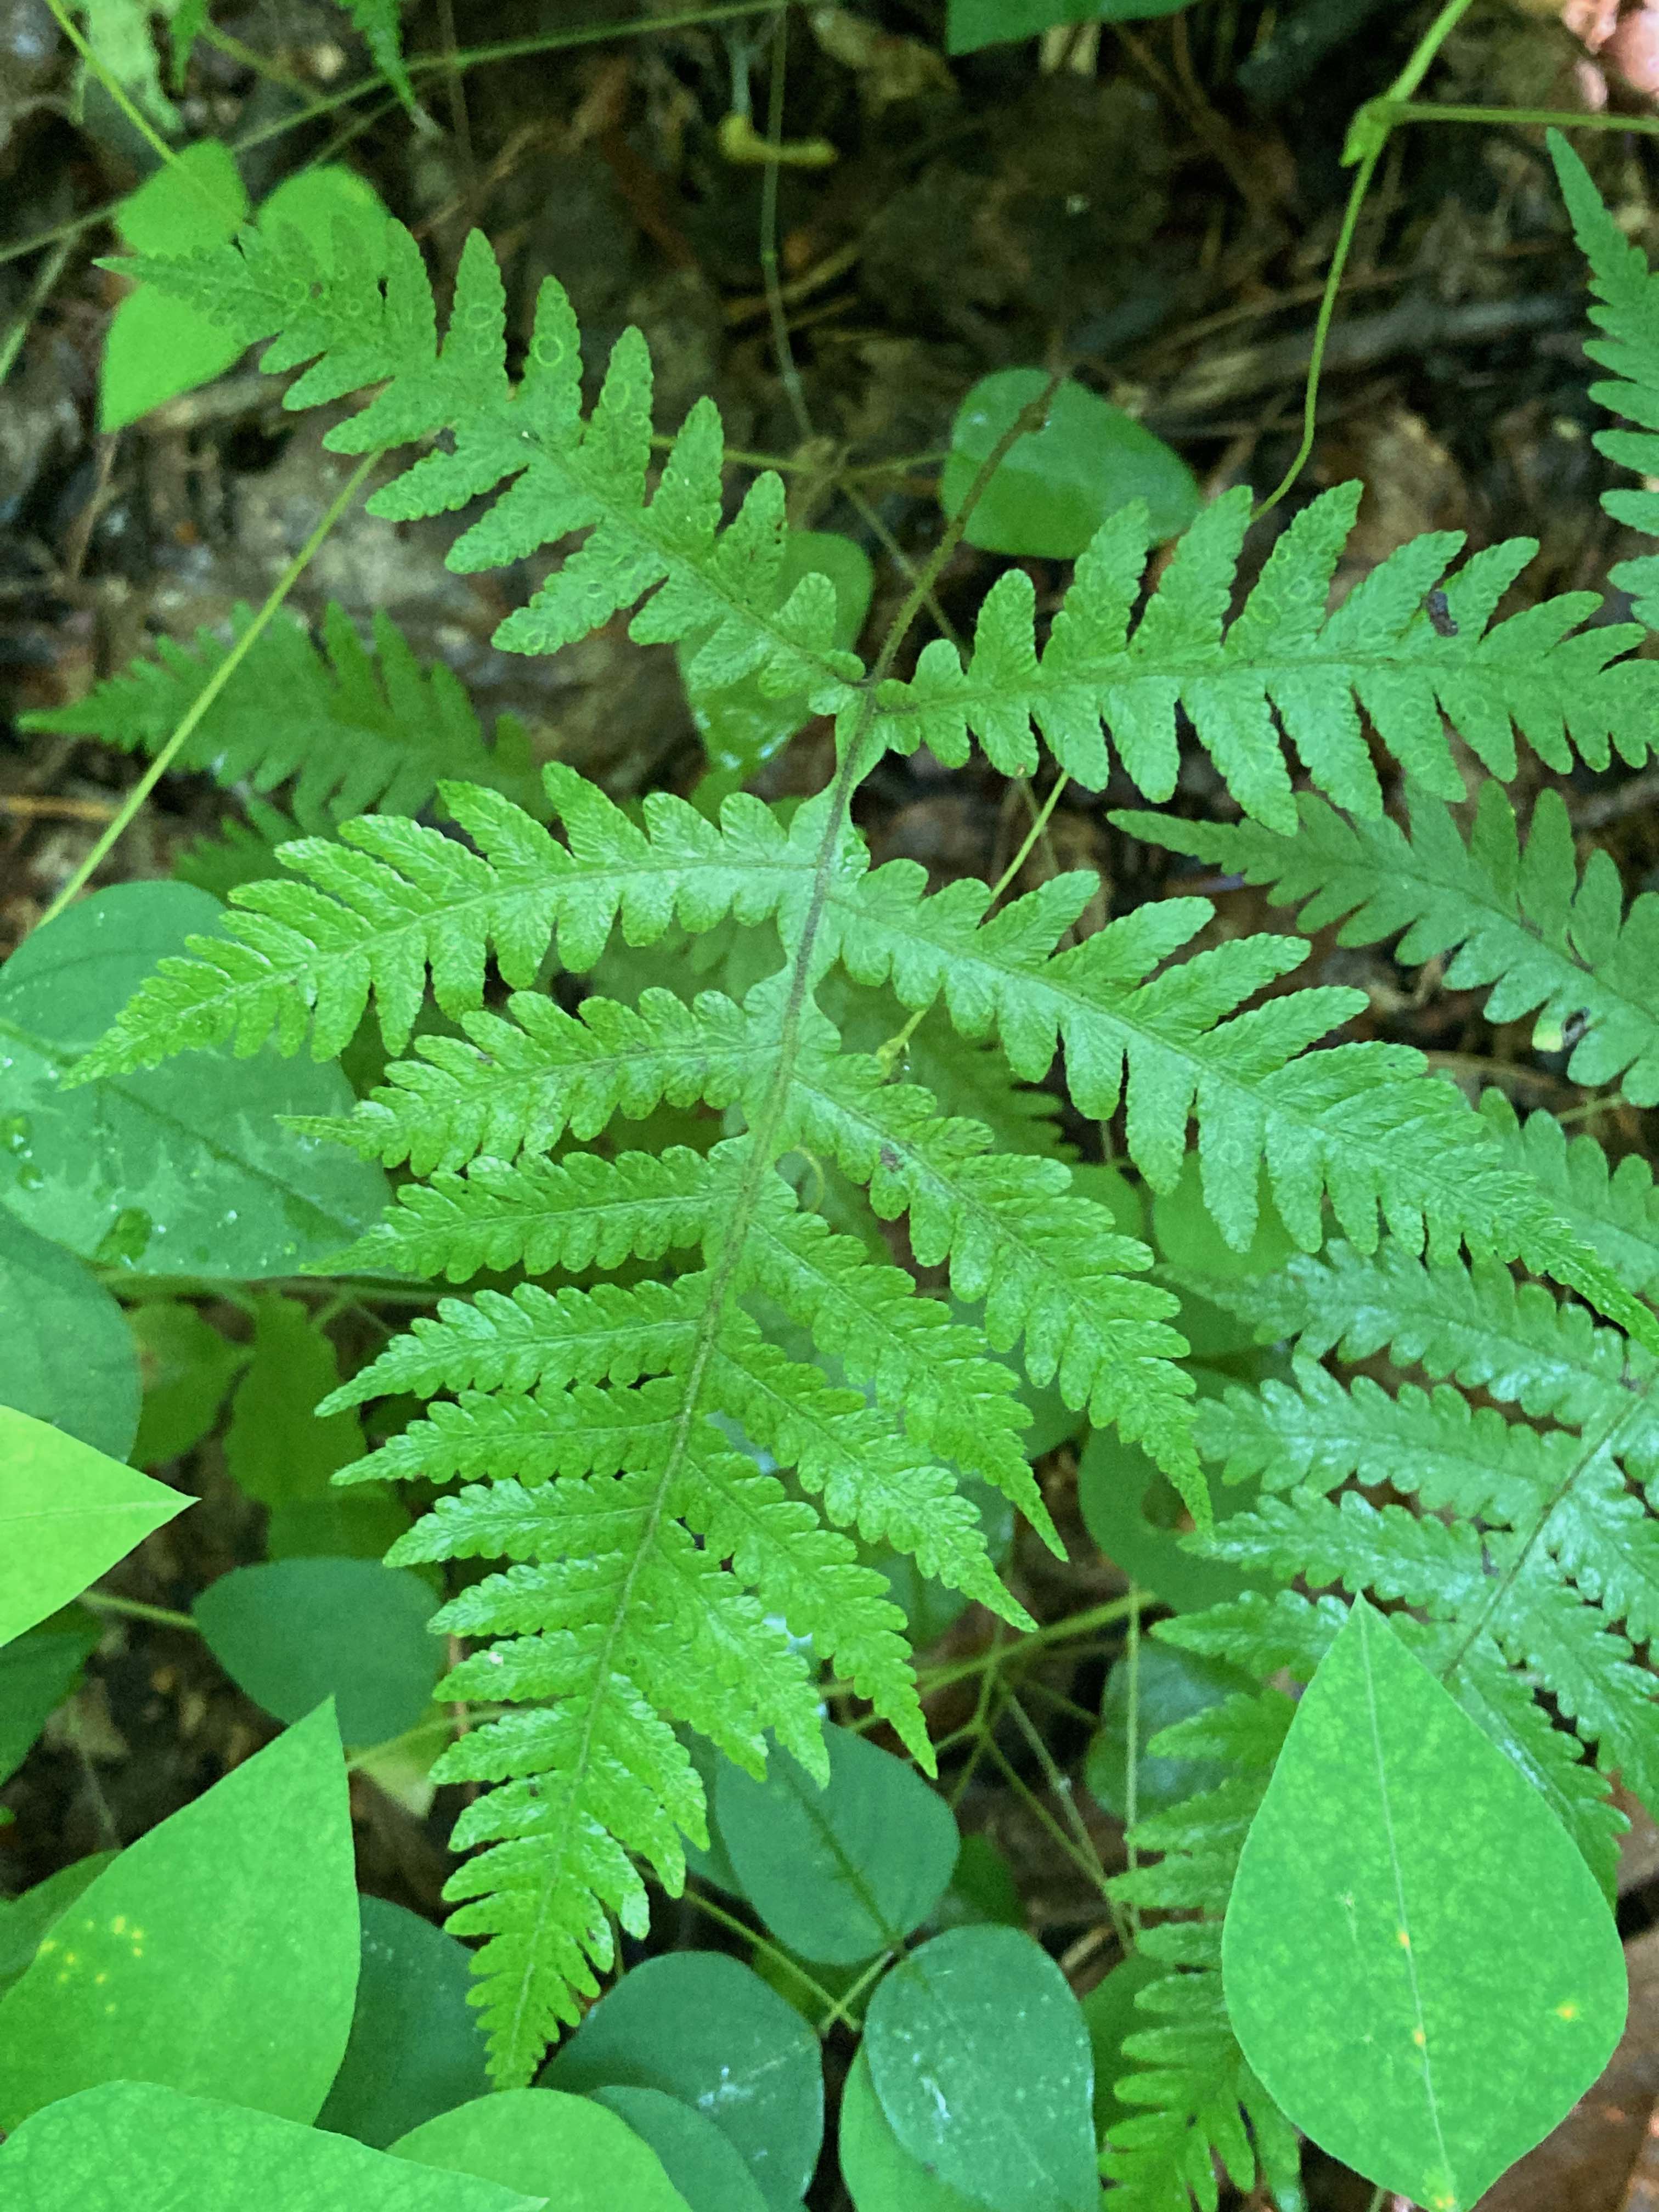 The Scientific Name is Phegopteris hexagonoptera. You will likely hear them called Broad Beech Fern. This picture shows the All the pinnae are connected along the rachis by a narrow wing of blade tissue. of Phegopteris hexagonoptera